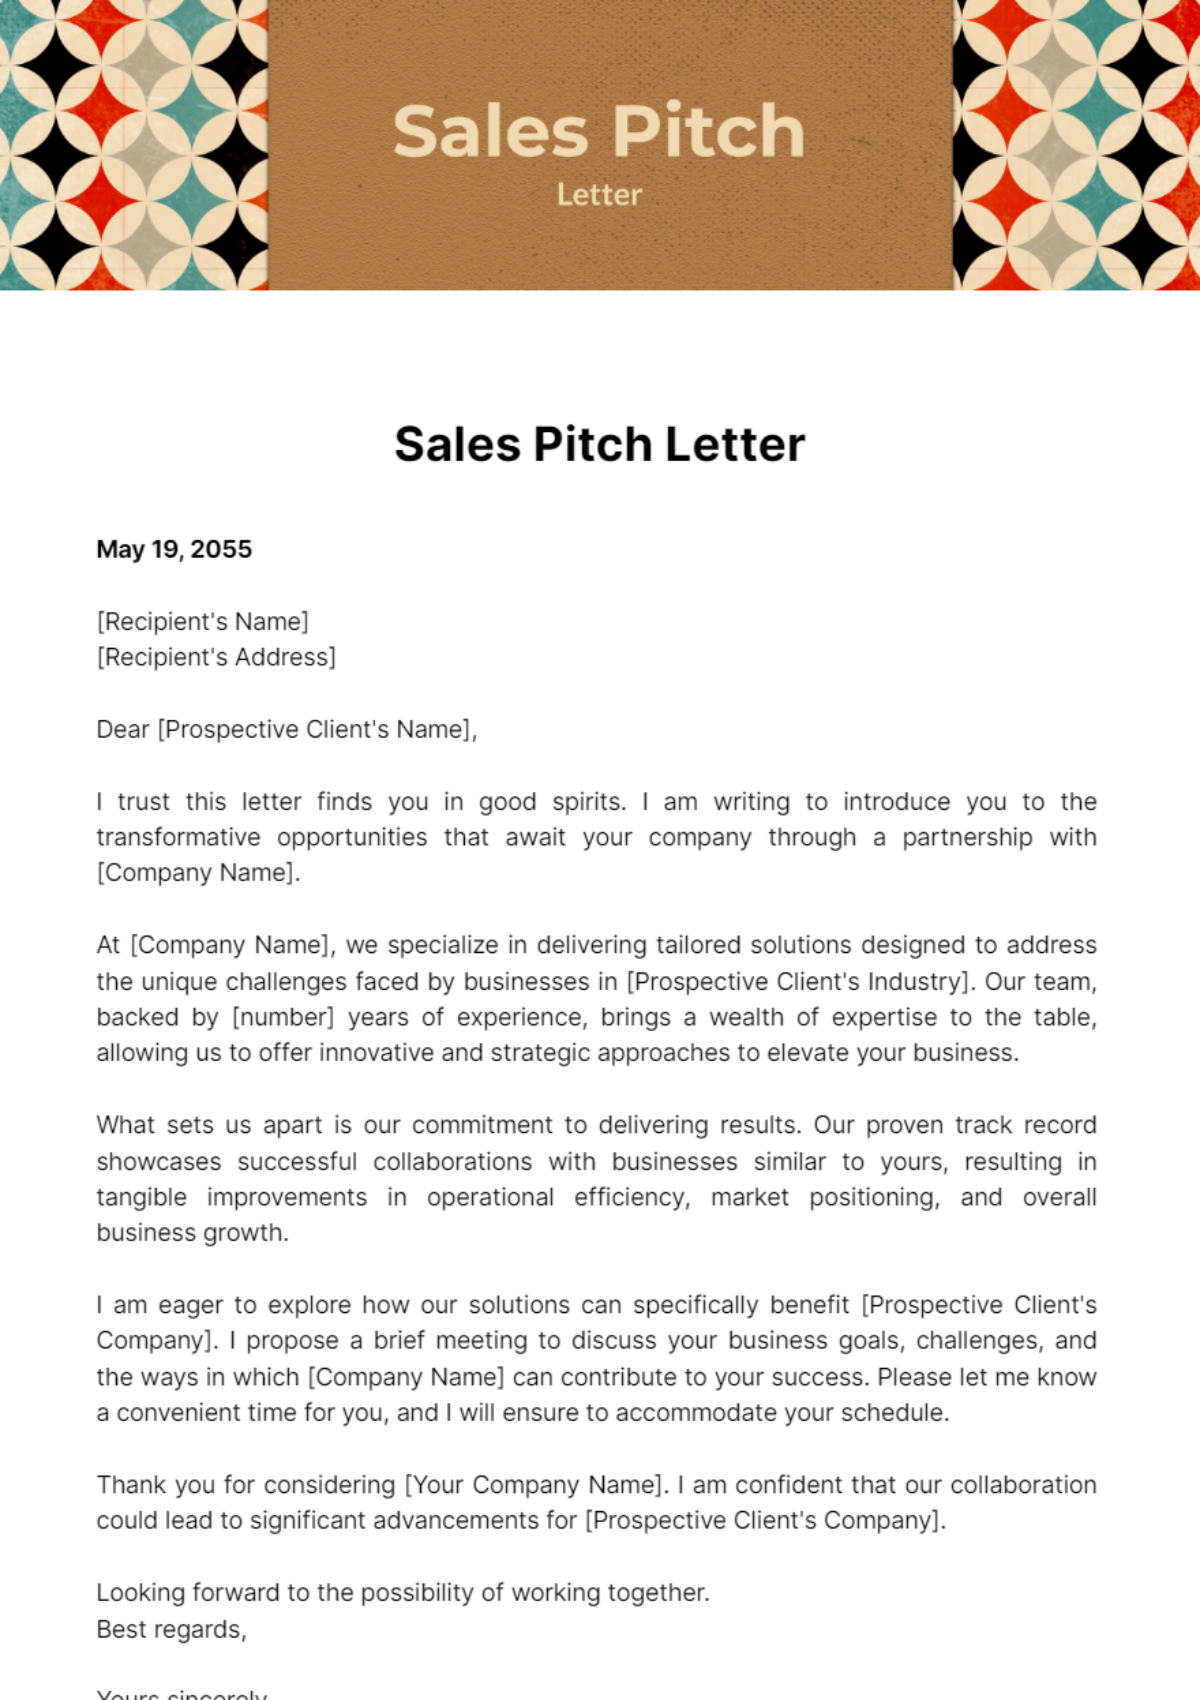 Sales Pitch Letter Template